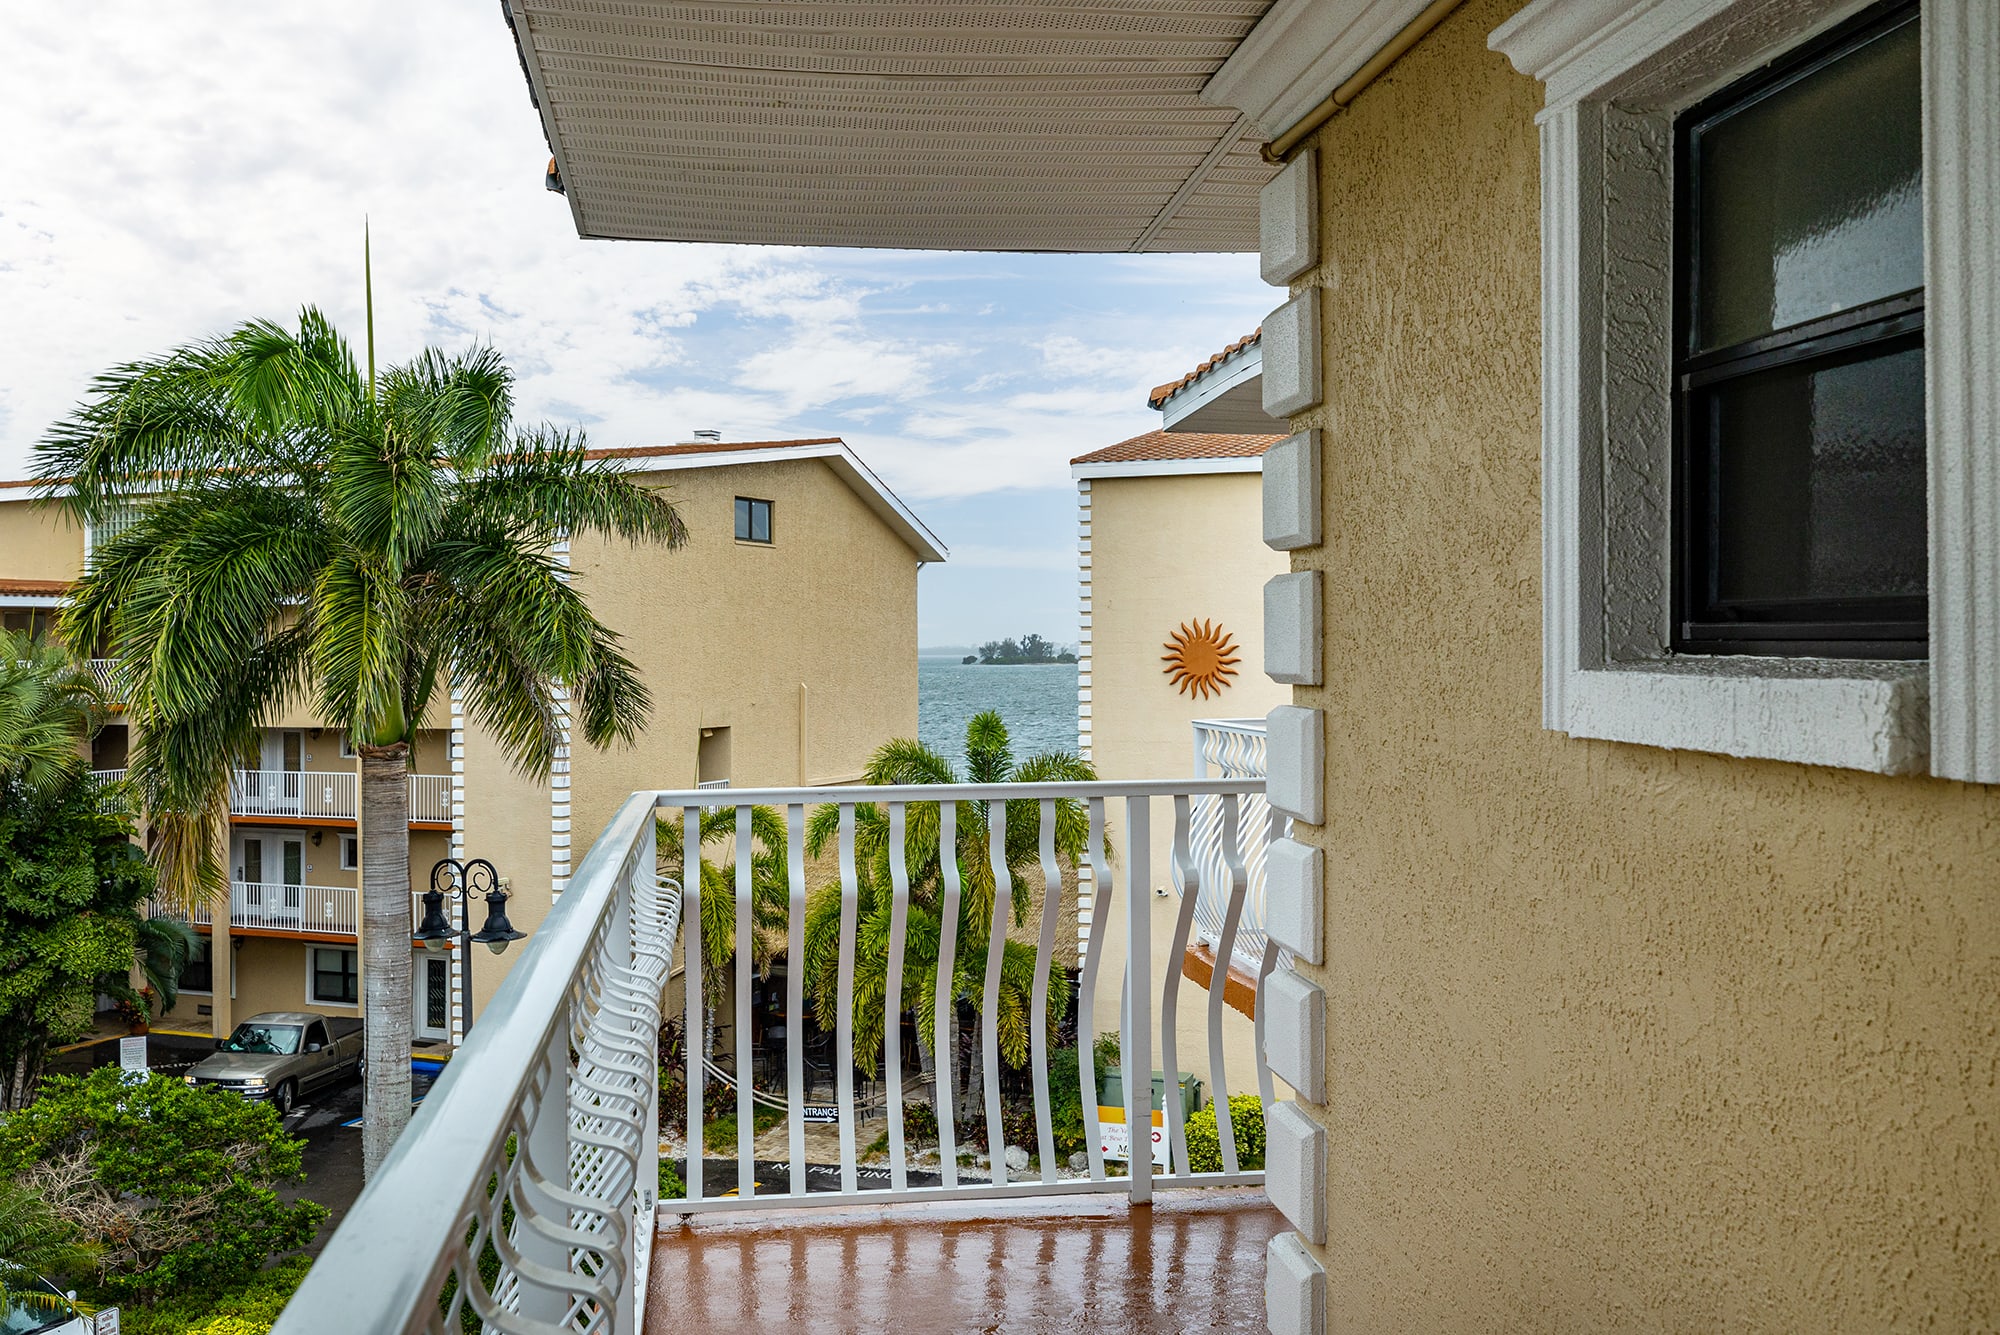 Breezeway leading to the room with a view!